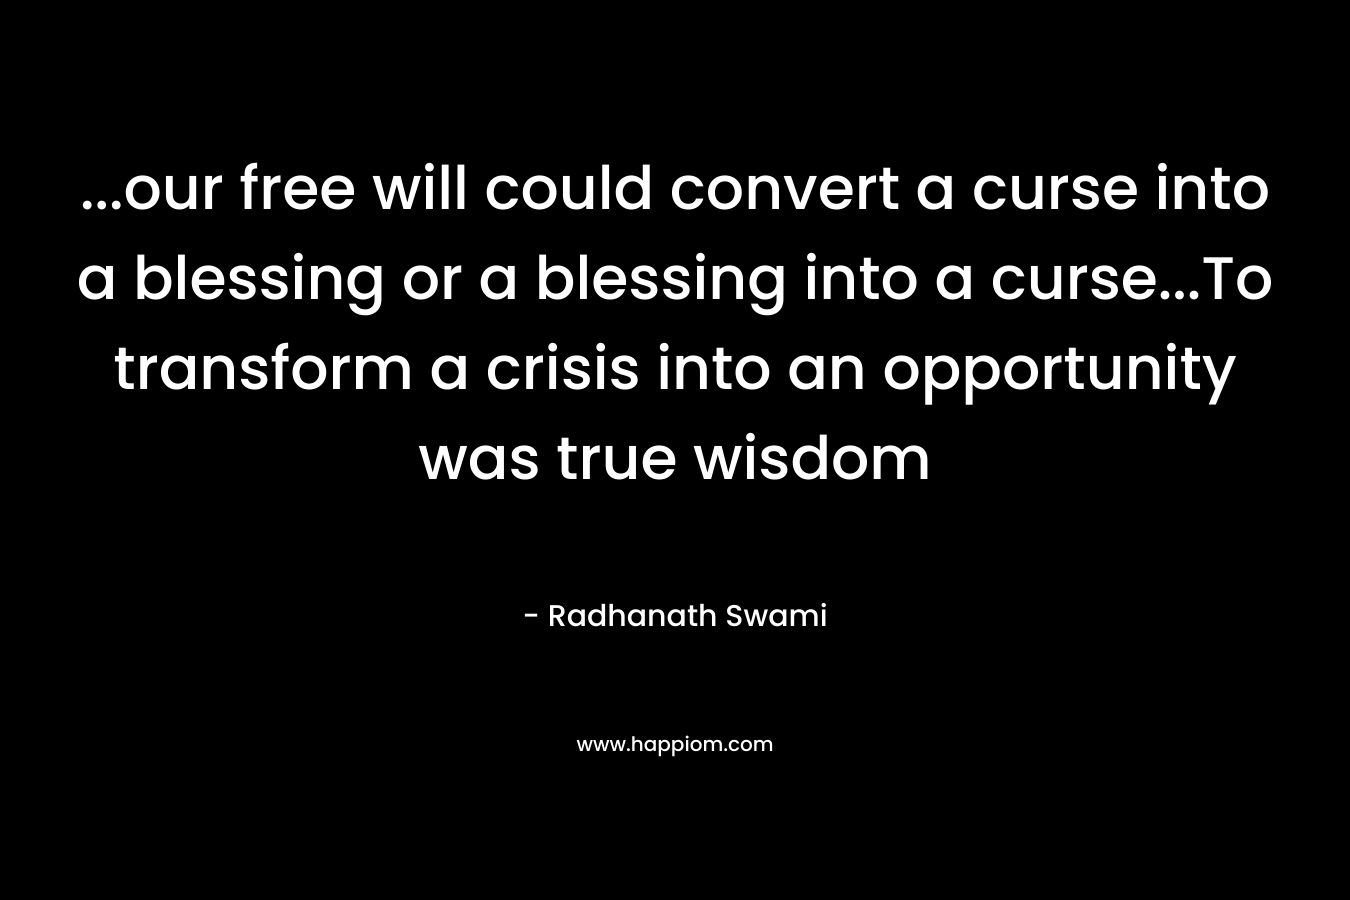 ...our free will could convert a curse into a blessing or a blessing into a curse...To transform a crisis into an opportunity was true wisdom